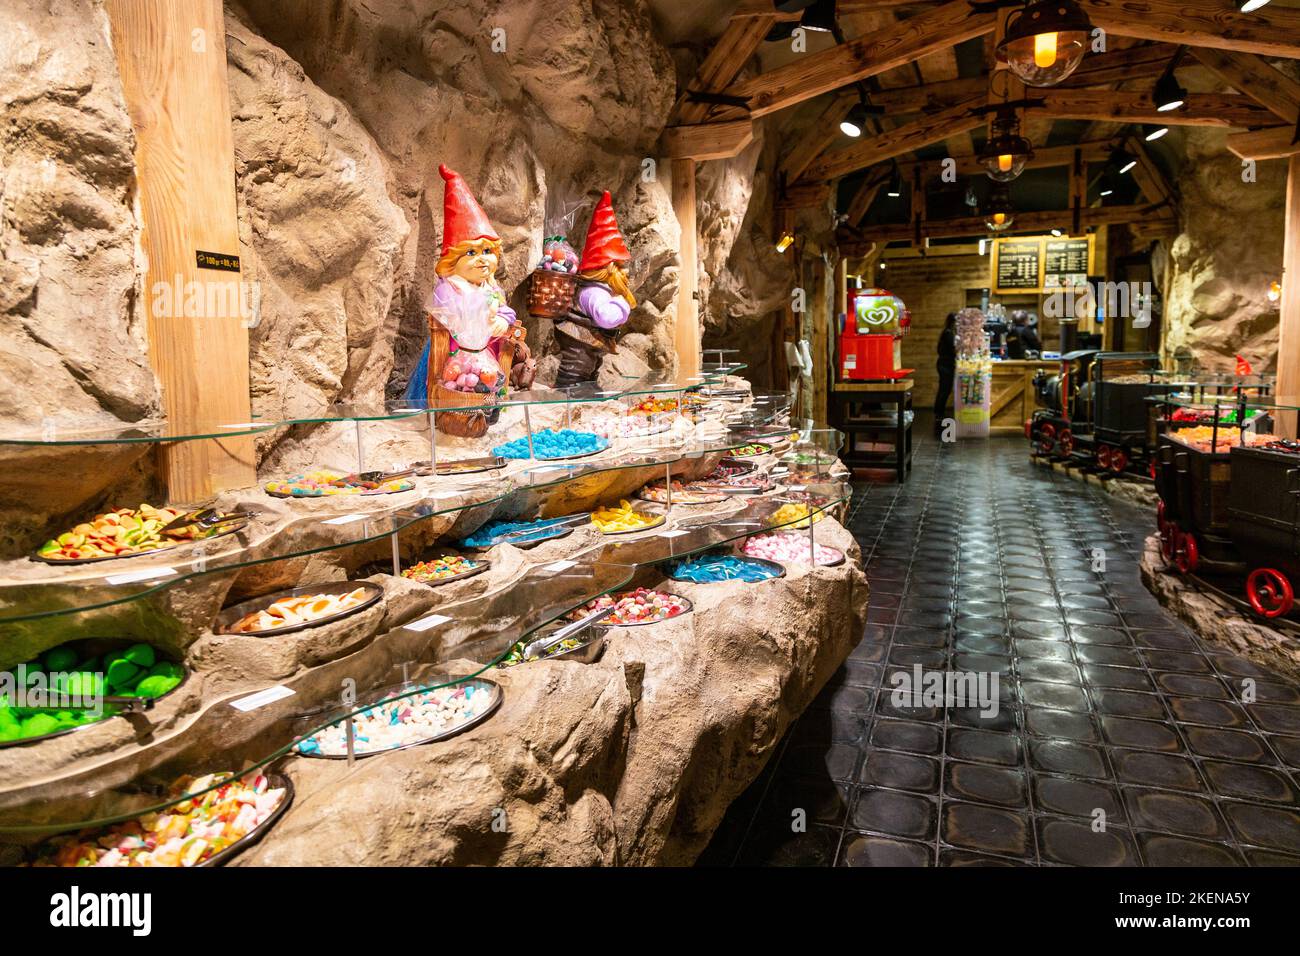 Interior of Candy miners sweet shop in Prague, Czech Republic Stock Photo